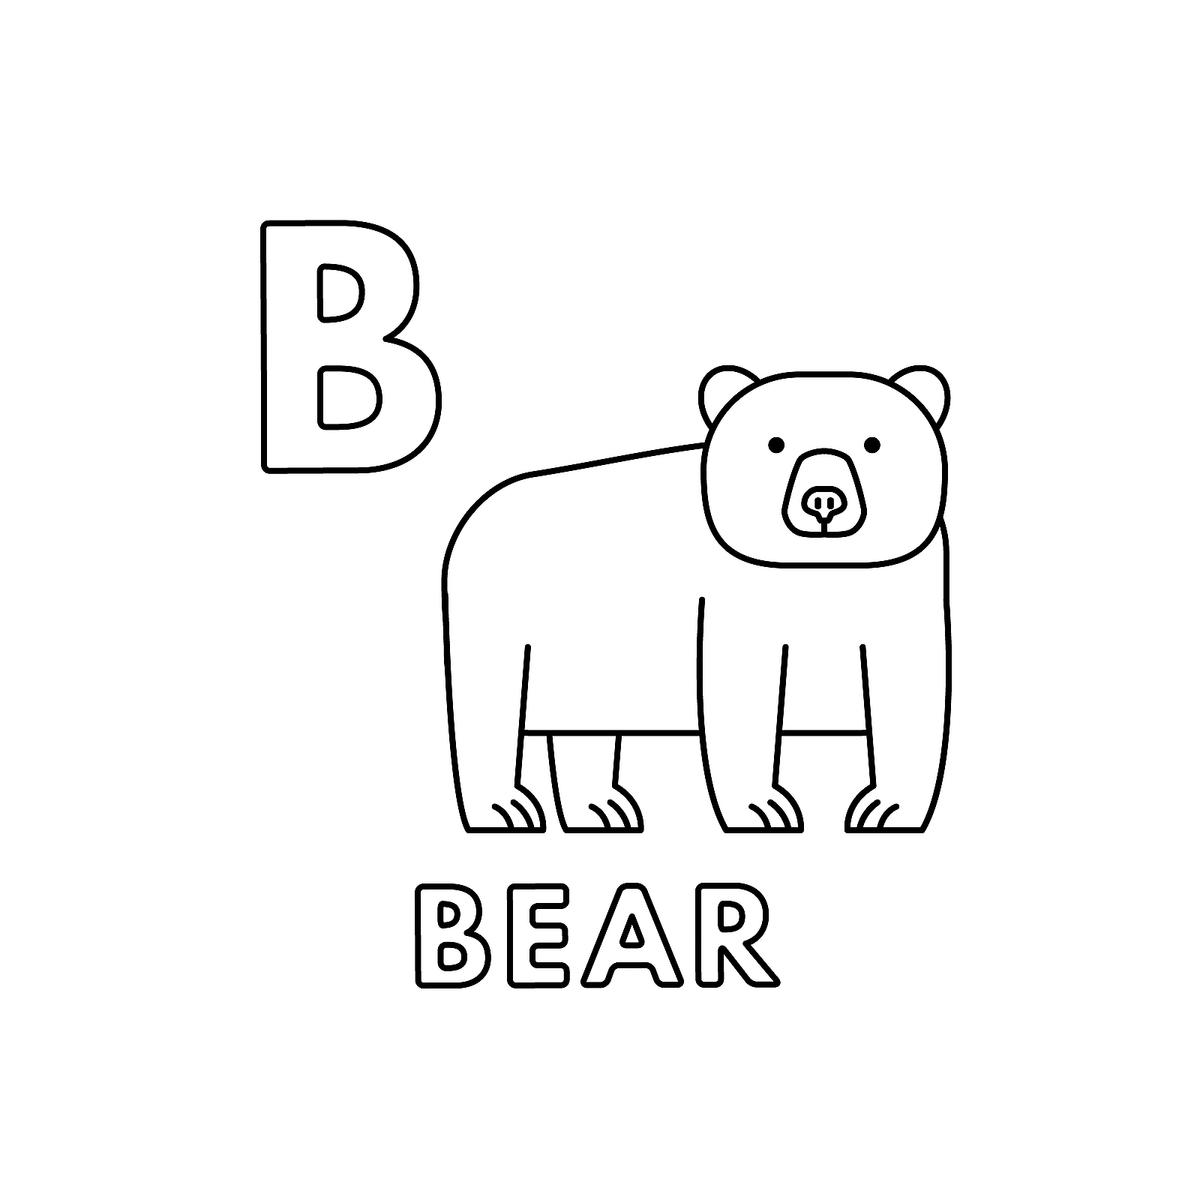 Alphabet coloring pages fun printable animal